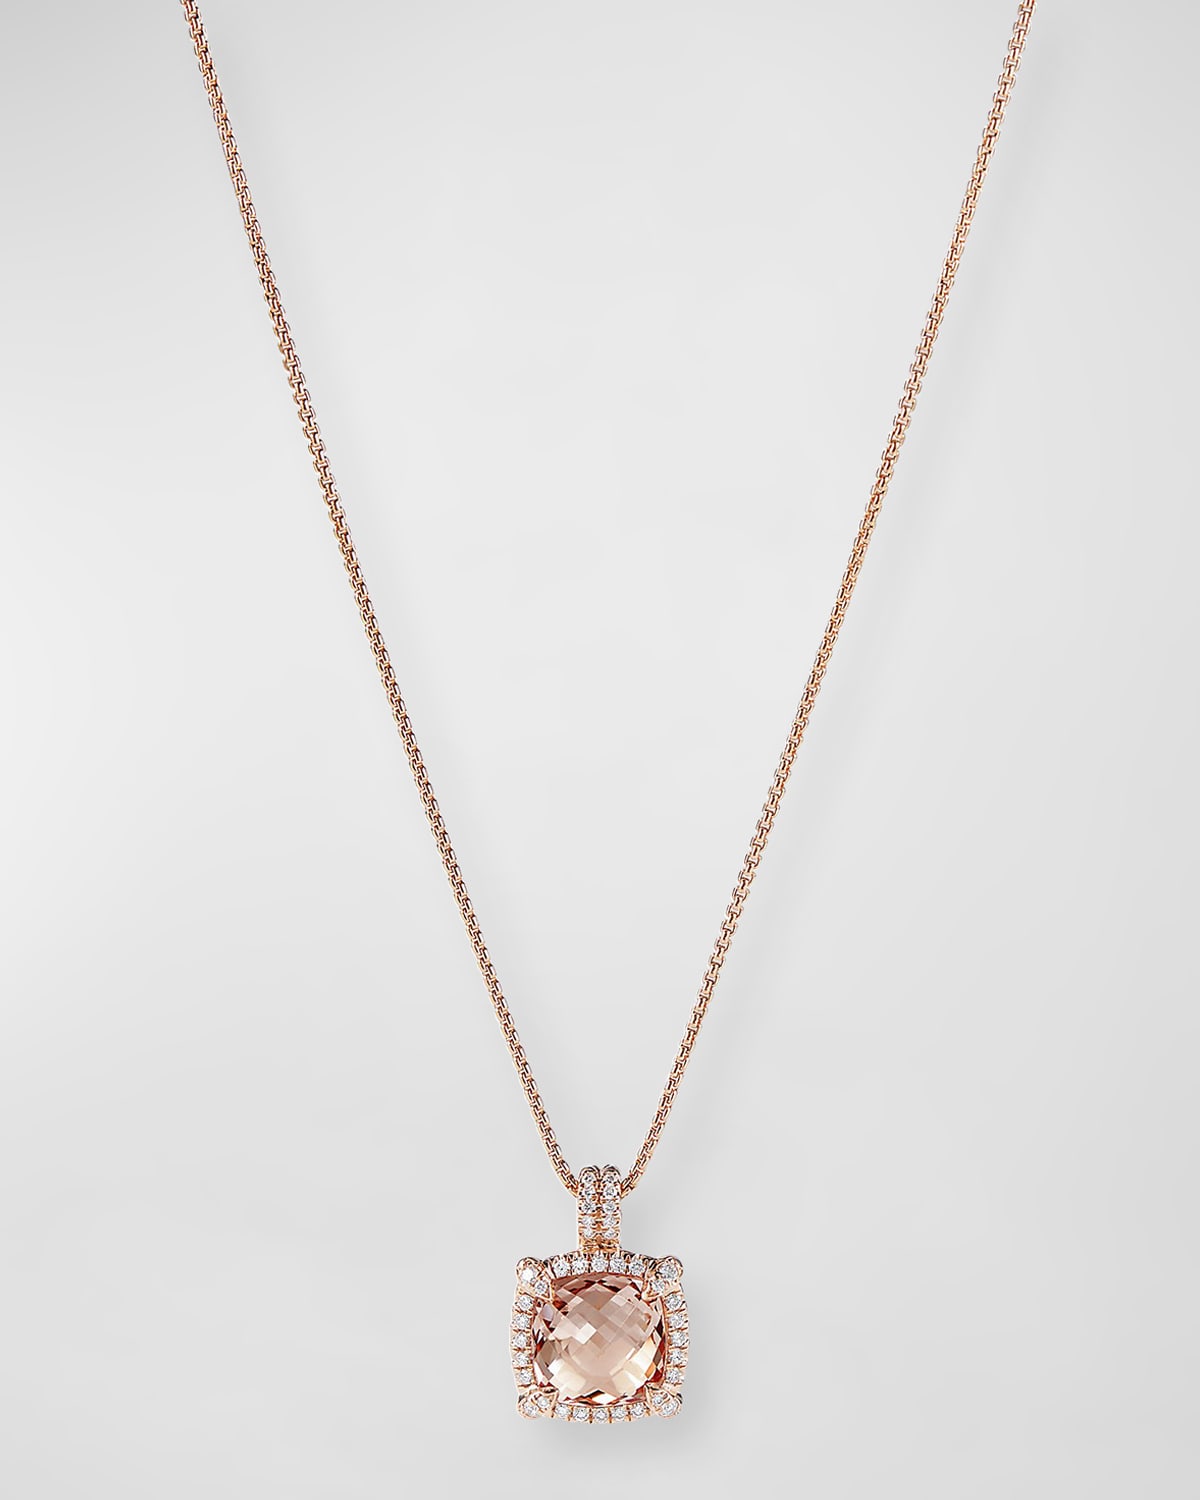 DAVID YURMAN CHATELAINE PENDANT NECKLACE WITH MORGANITE AND DIAMONDS IN 18K ROSE GOLD, 11MM, 16-18"L